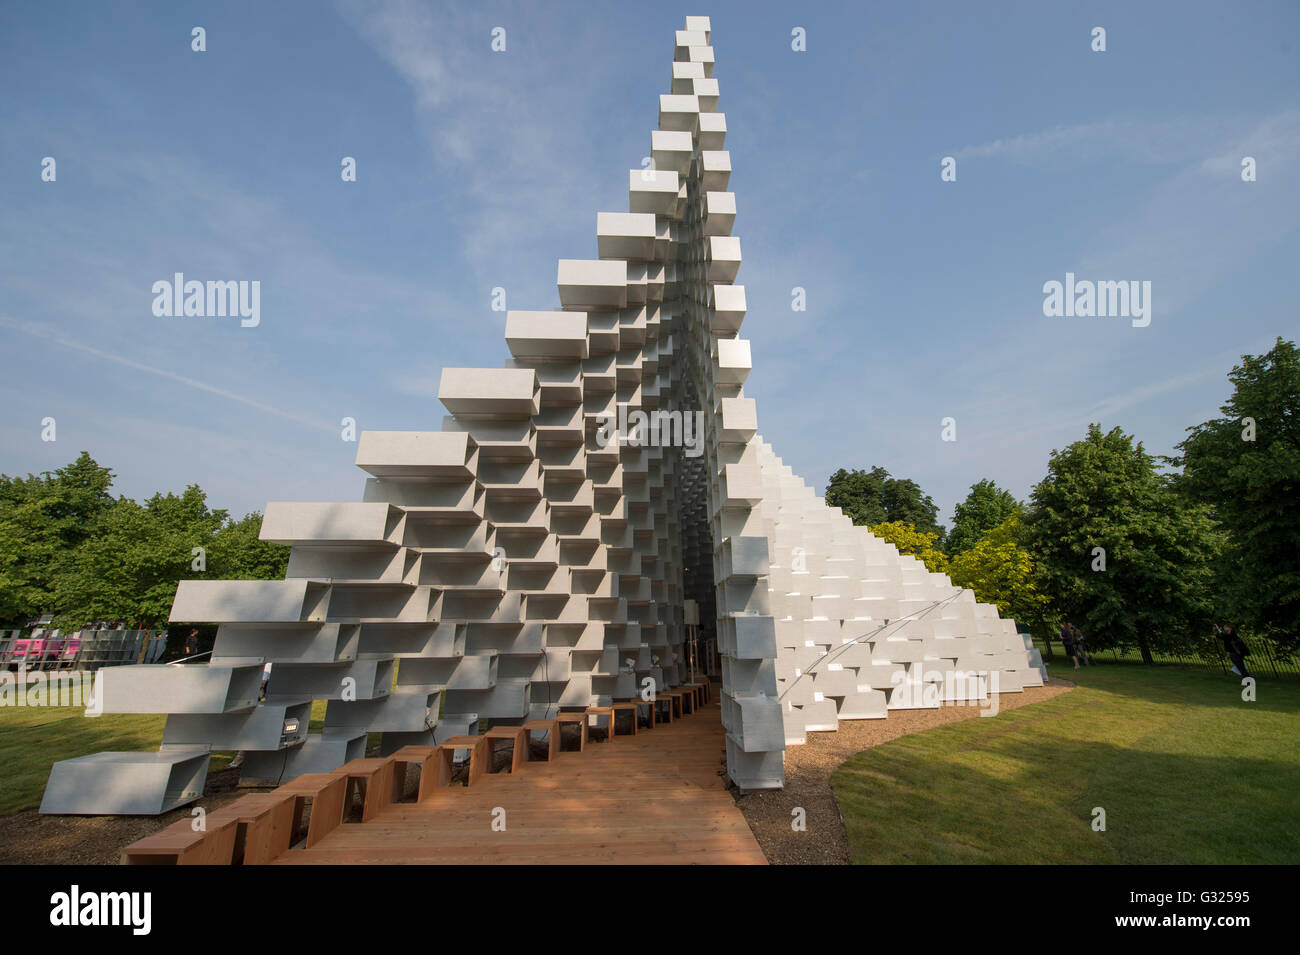 Serpentine Gallery, London, UK. 7th June 2016. Serpentine Architecture Programme 2016, Press View for the Serpentine Pavilion designed by  Bjarke Ingels Group (BIG) in Kensington Gardens. Credit: Malcolm Park/Alamy Live News. Stock Photo